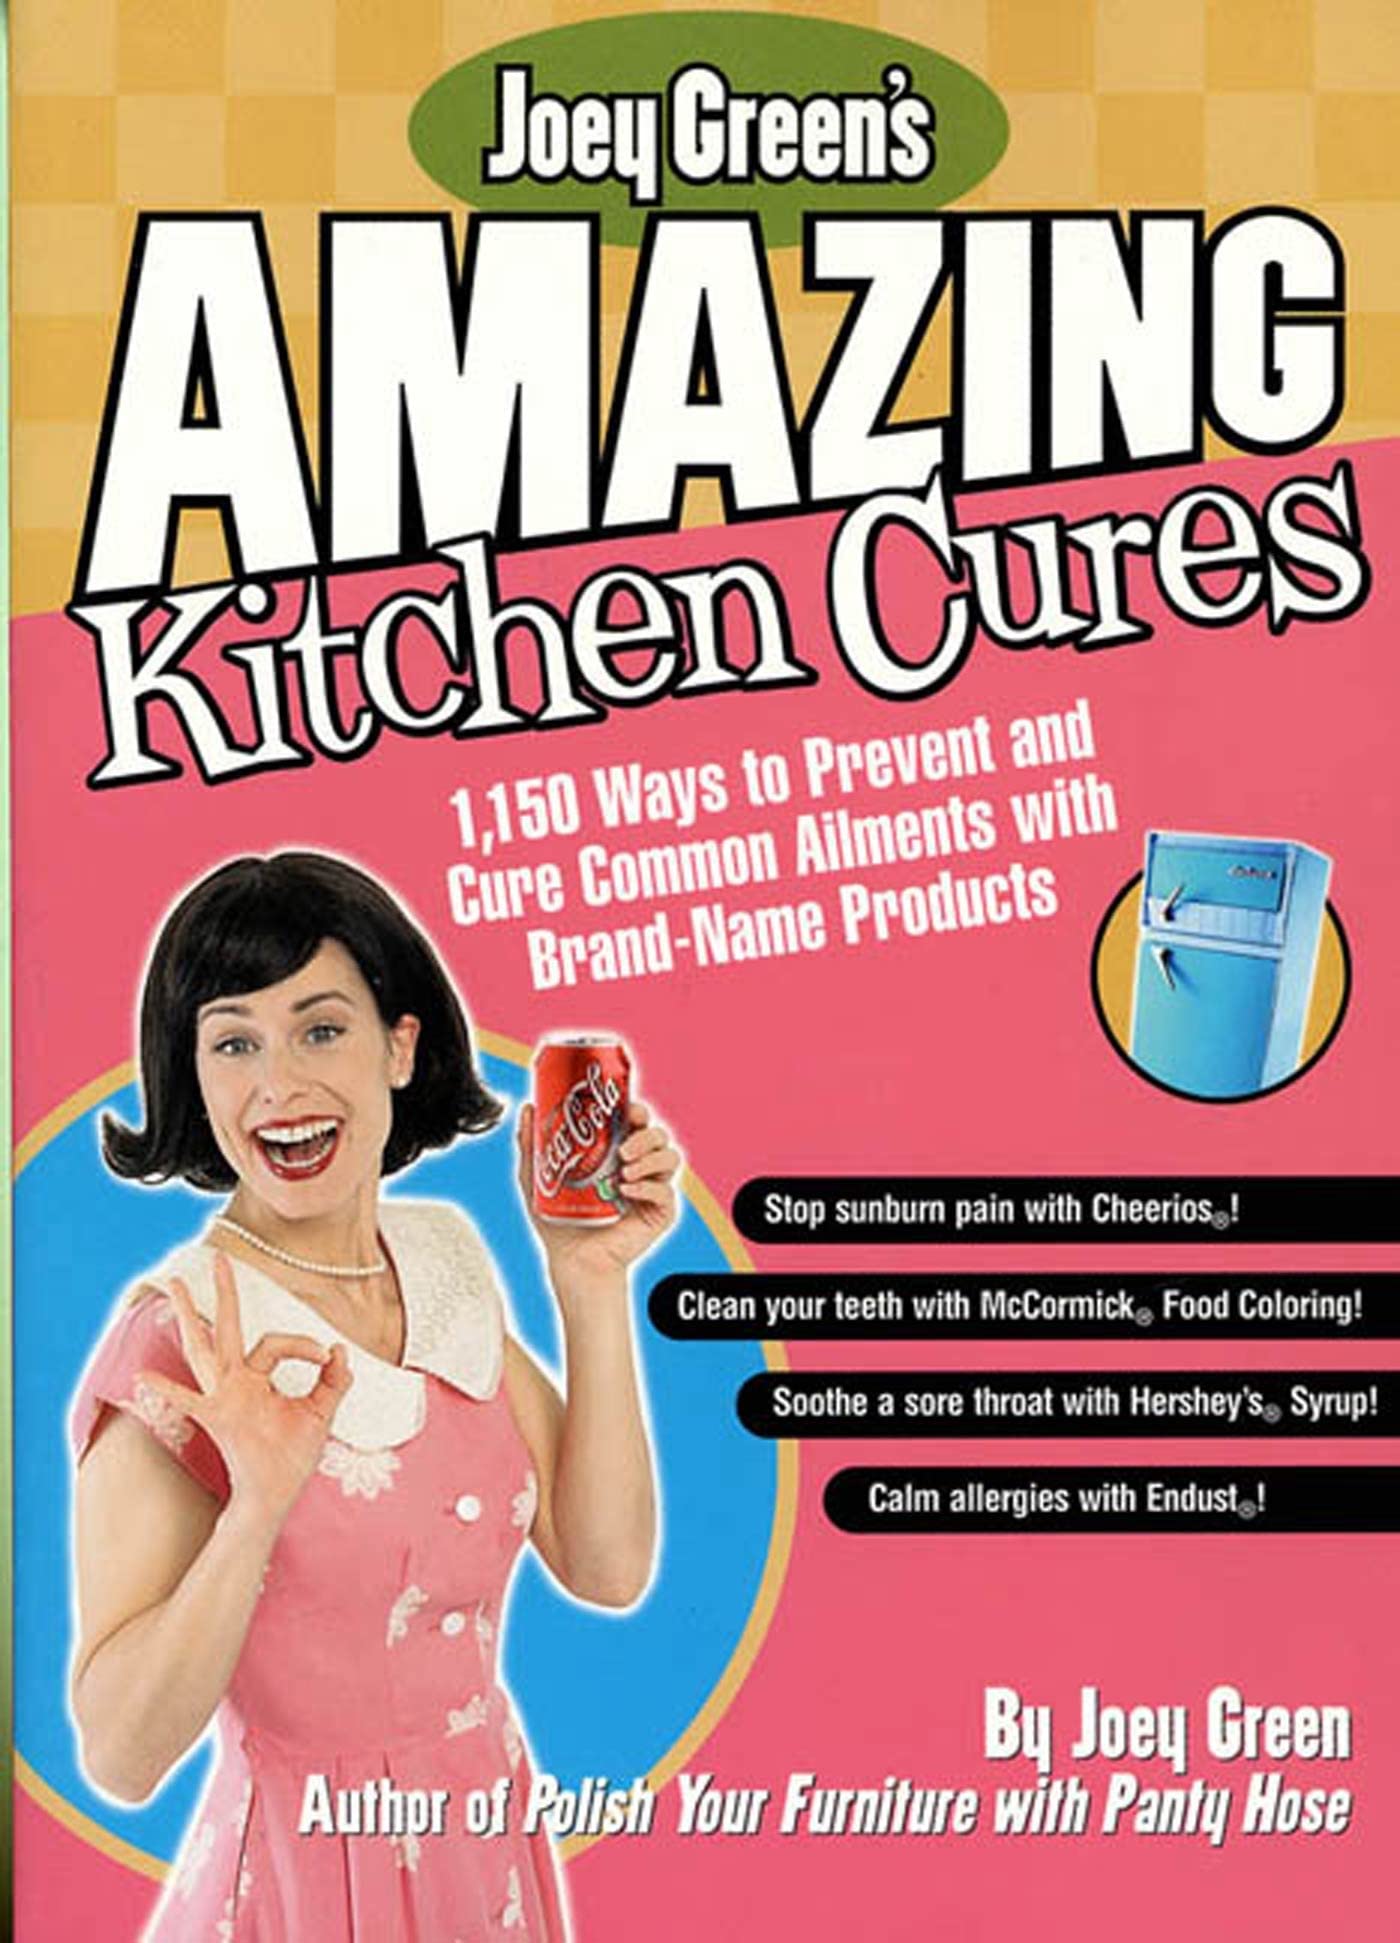 Book Cover Joey Green's Amazing Kitchen Cures: 1,150 Ways to Prevent and Cure Common Ailments with Brand-Name Products